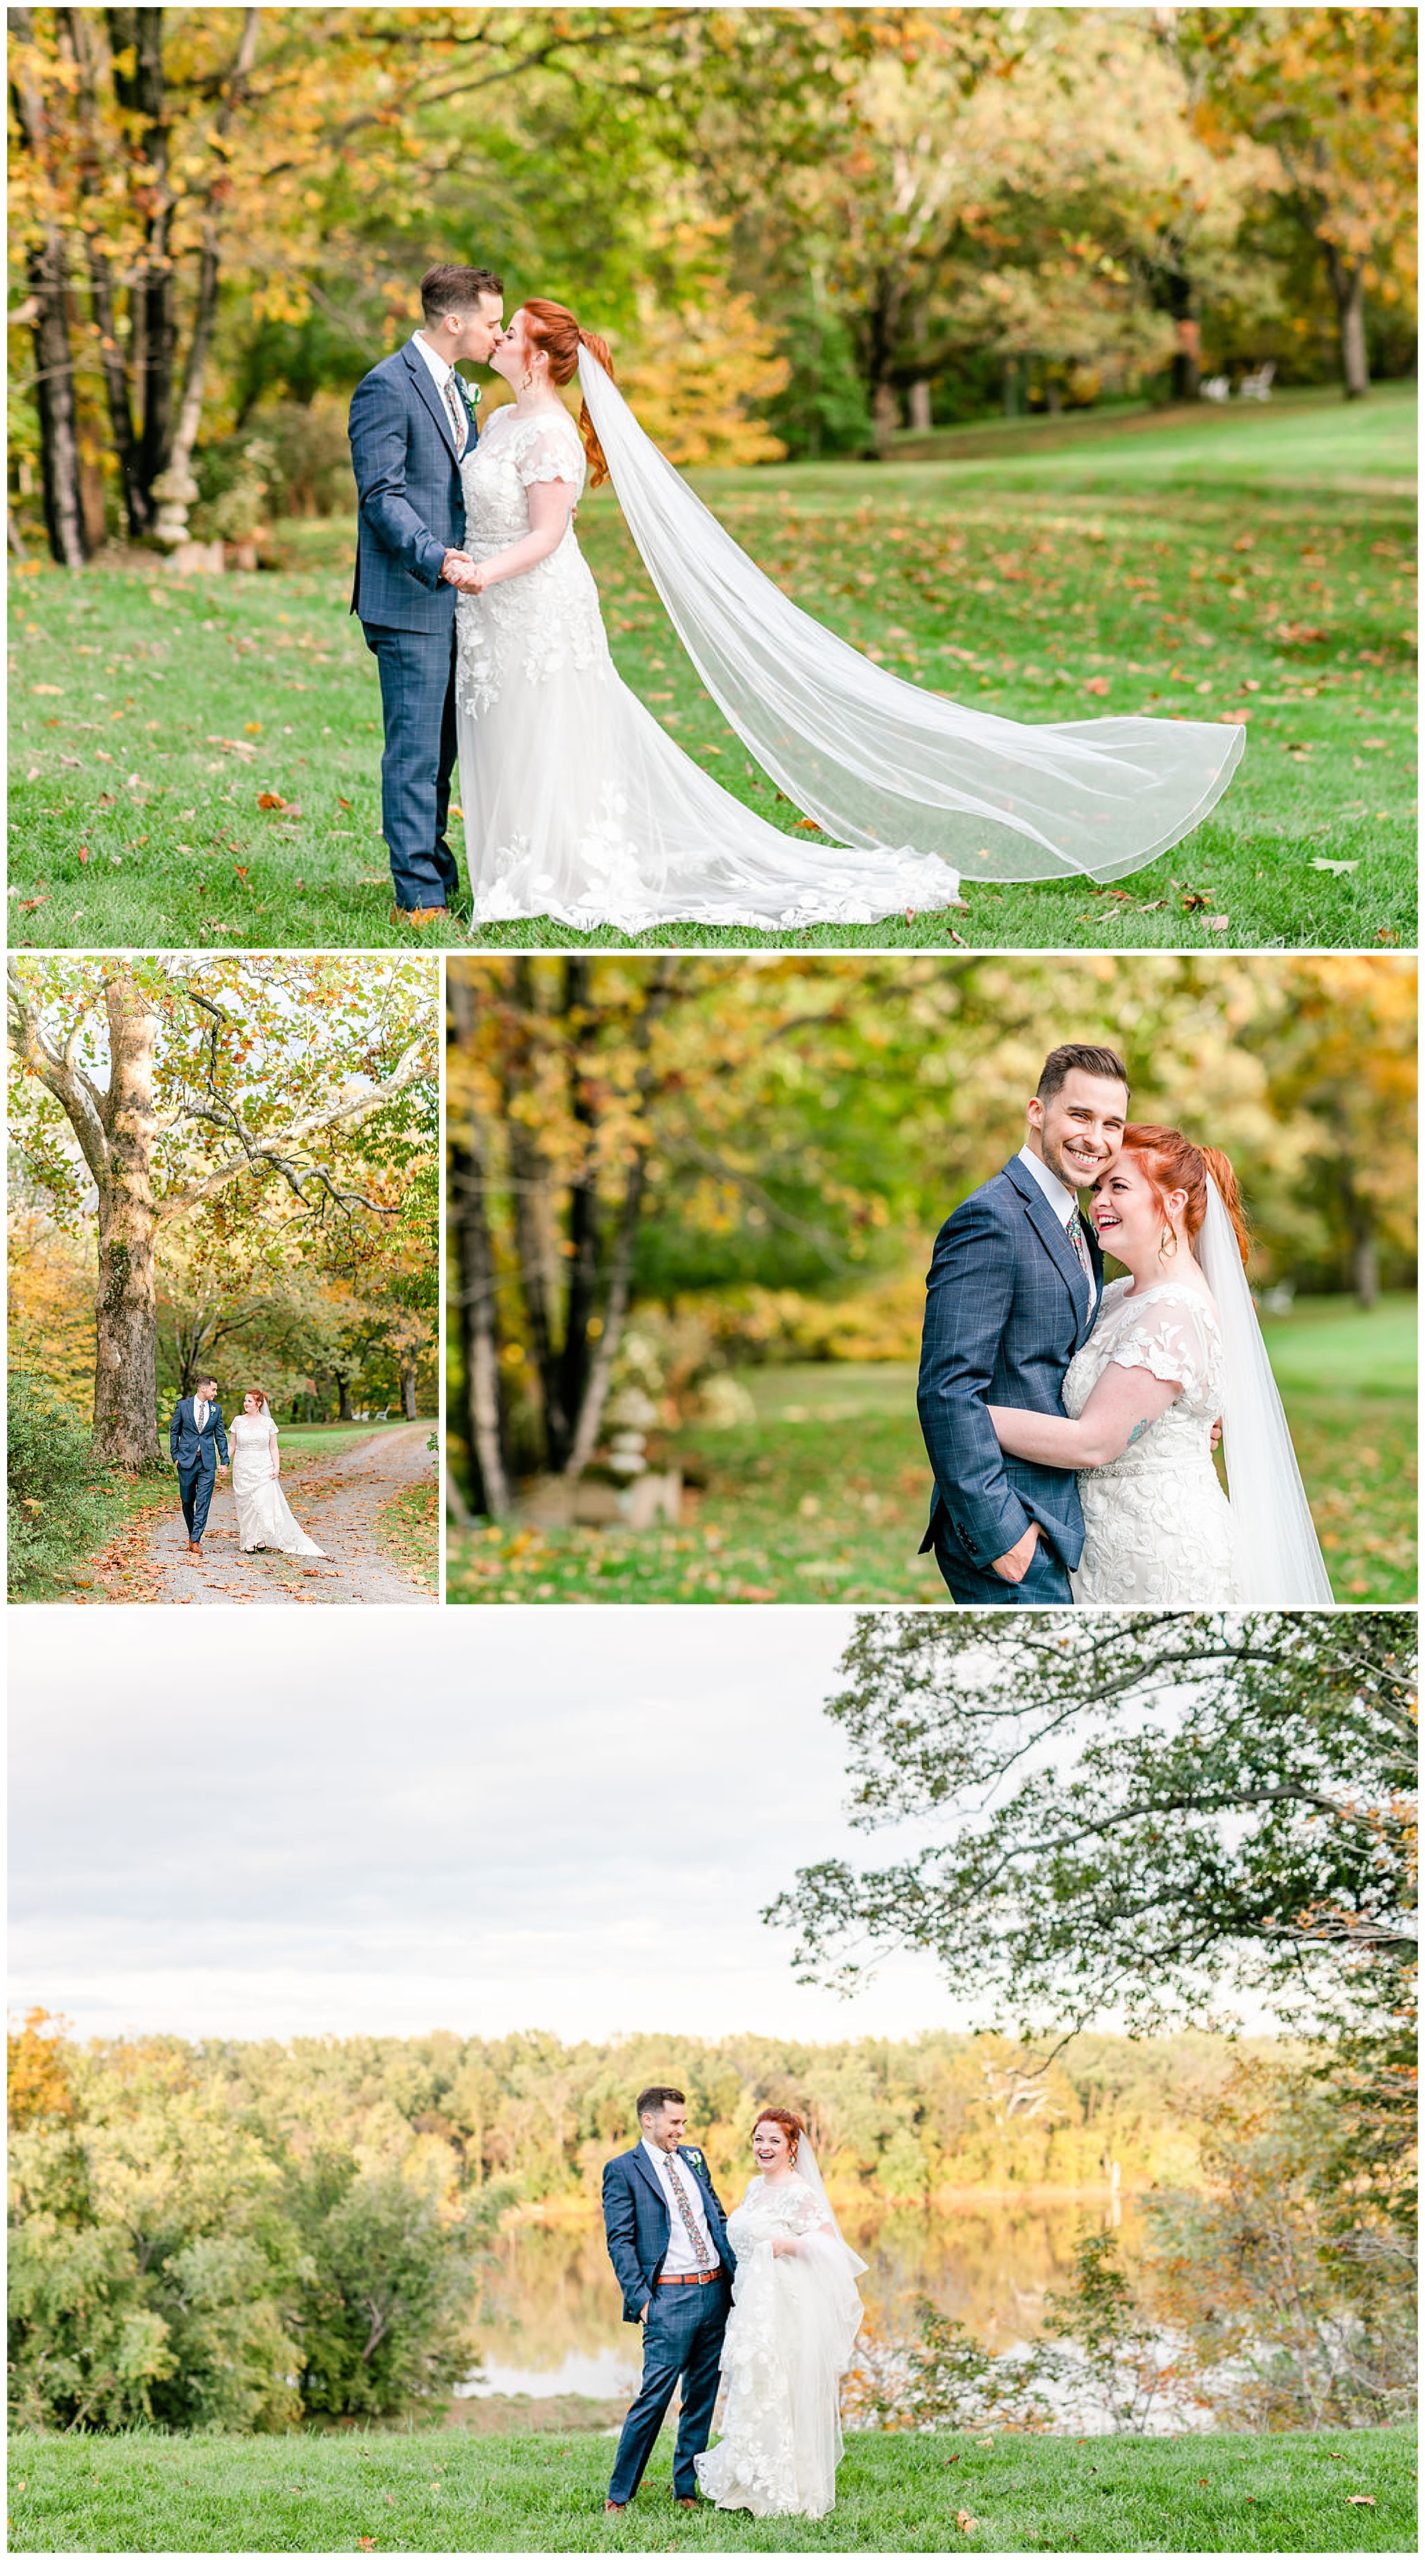 why to have privacy for portraits, romantic portraits, wedding photography tips, wedding photography ideas, high end wedding photography tips, D.C. wedding photographer, Rachel E.H. Photography, Murray Hill wedding